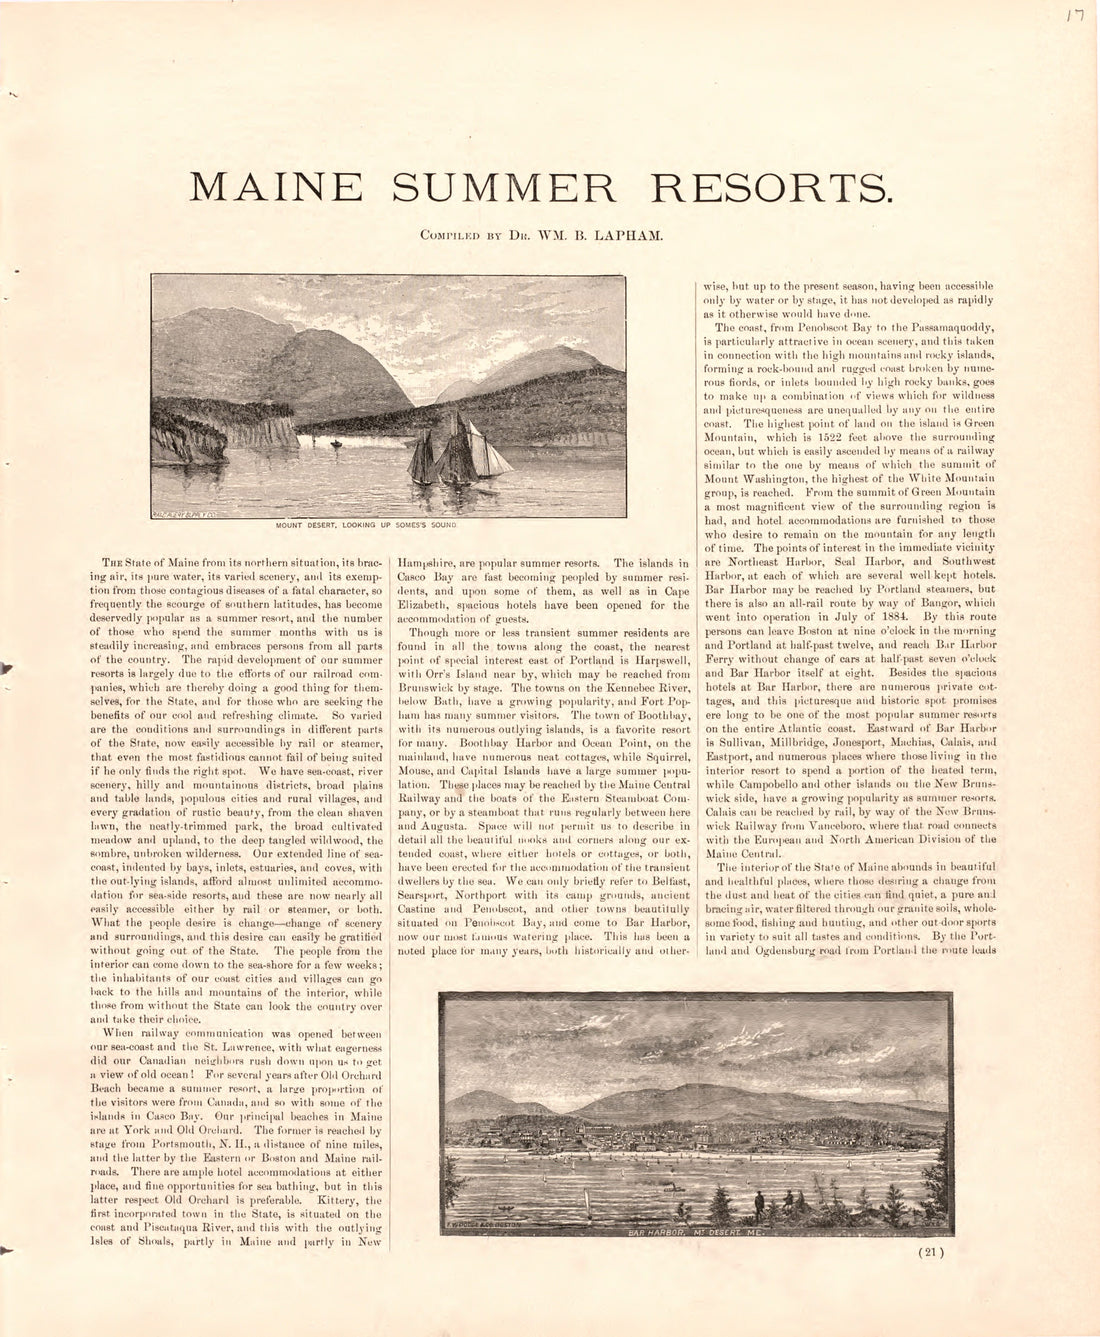 This hand drawn illustration (map) of Maine Summer Resorts from Colby&